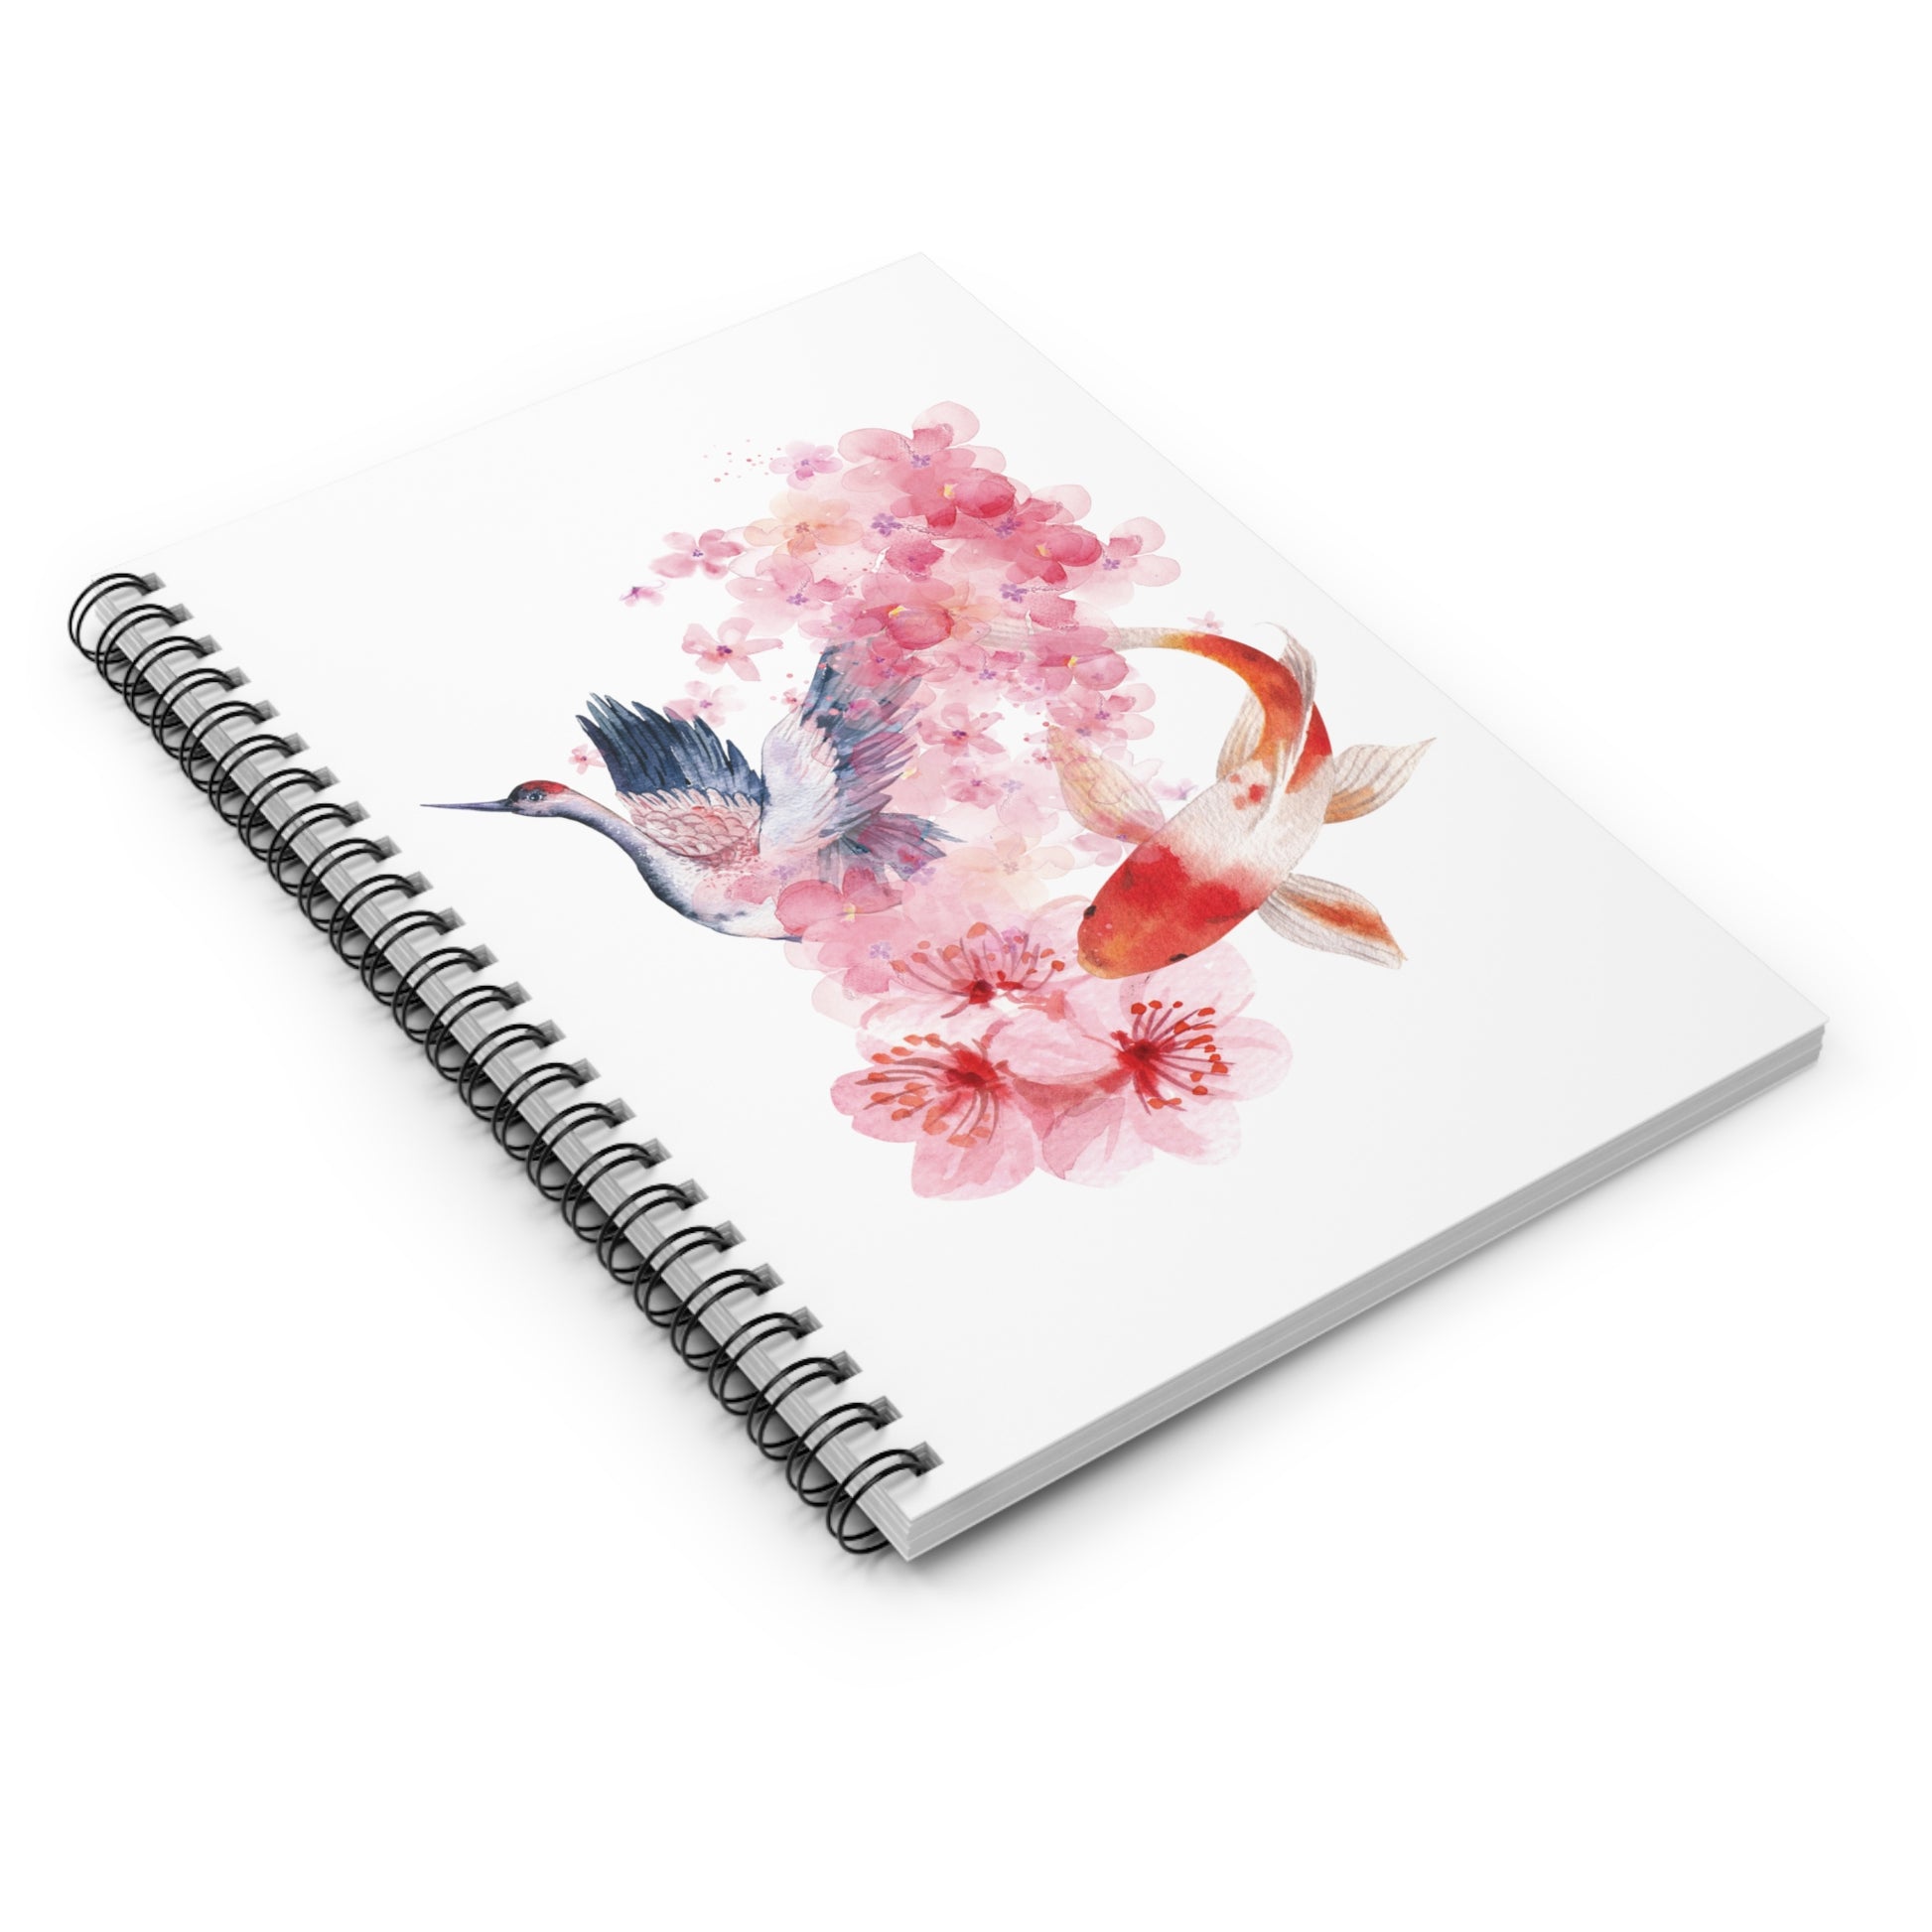 Don't Be Koi: Spiral Notebook - Log Books - Journals - Diaries - and More Custom Printed by TheGlassyLass